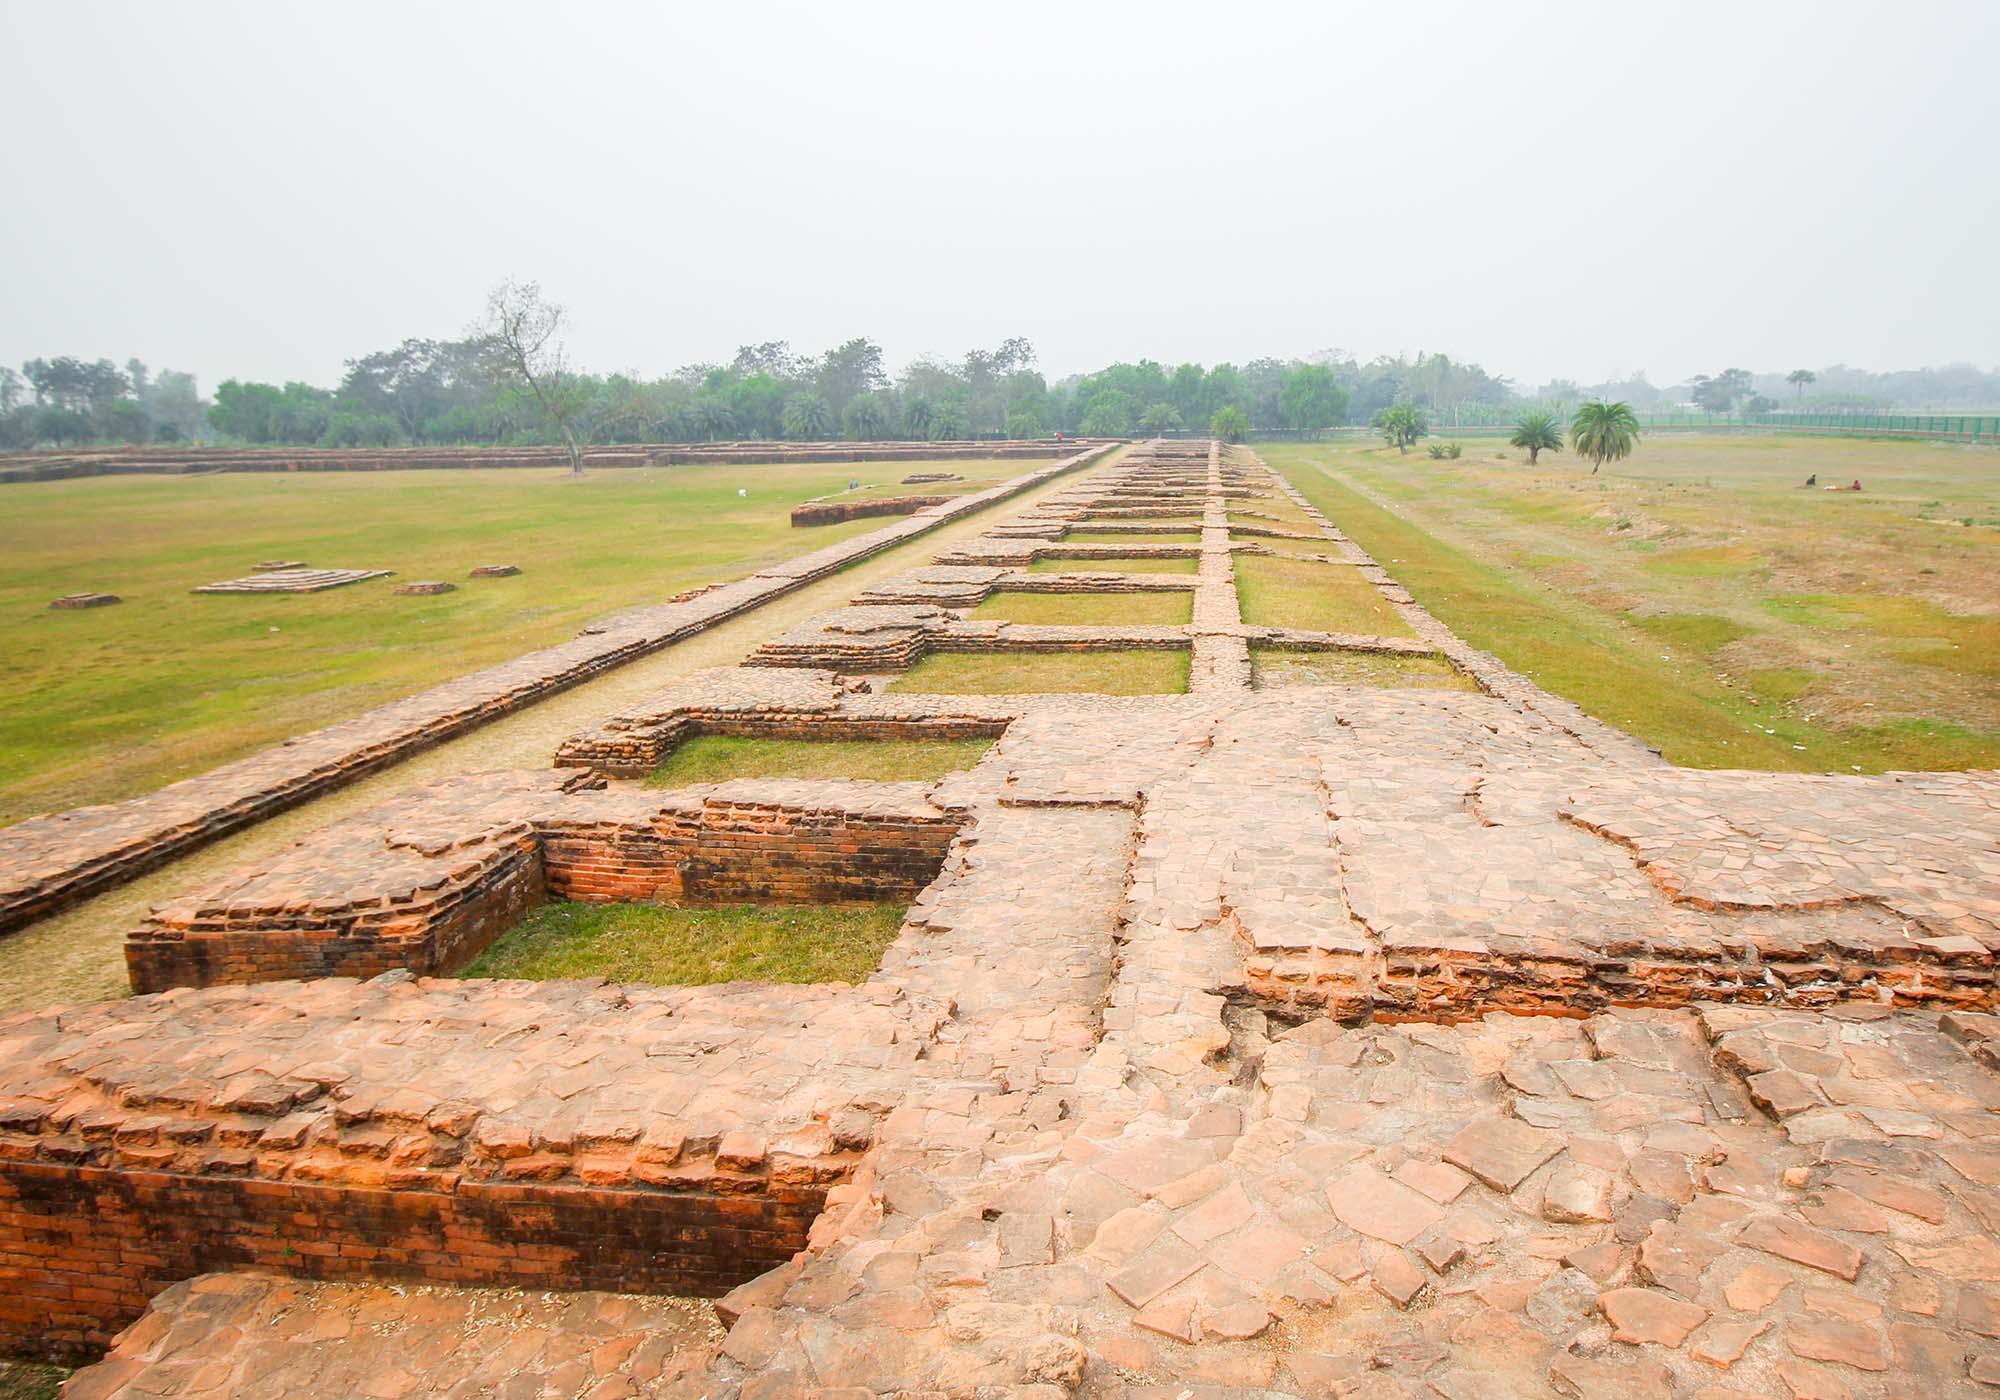 Some of the 177 rooms where the monks would have lived around the courtyard of the monastery of Somapura Mahavihara at Paharpur. – © Julfiker Ahmed